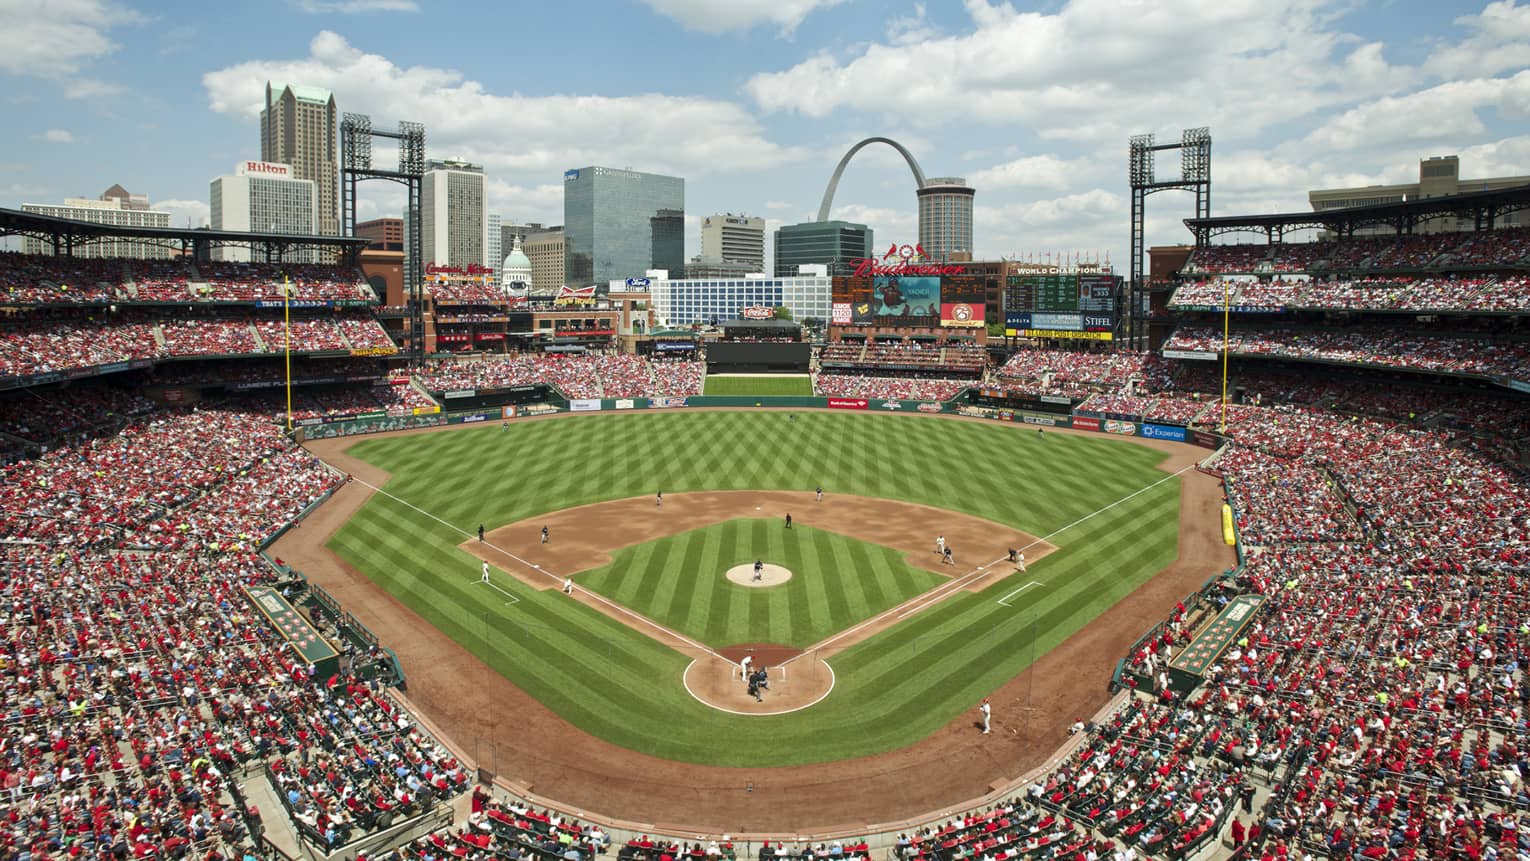 Aerial view of Busch Stadium baseball field, stands packed with crowds